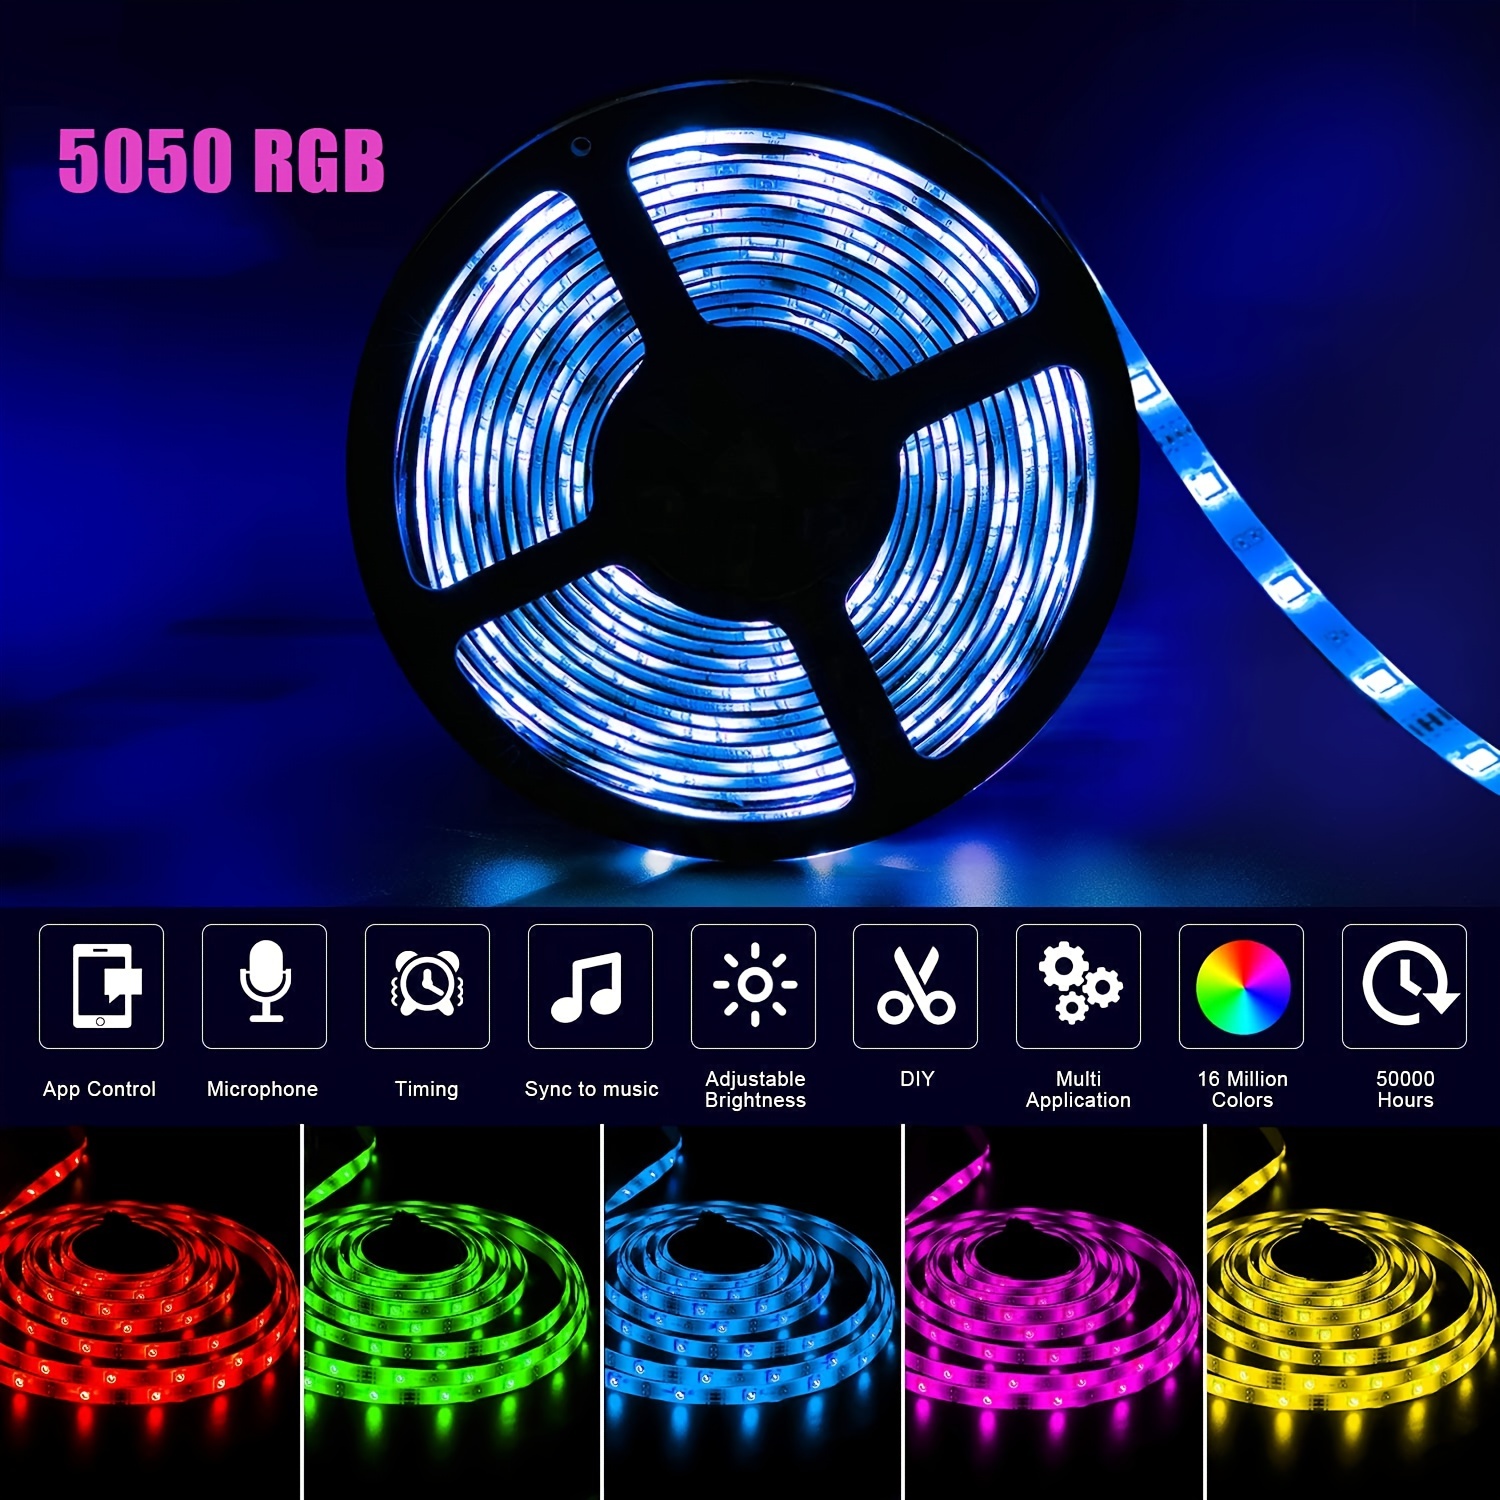 Buy 5050RGB Light Strip 24 Keys Remote Control Mobile APP Controlled LED Light for Home Decoration Party Holiday Party